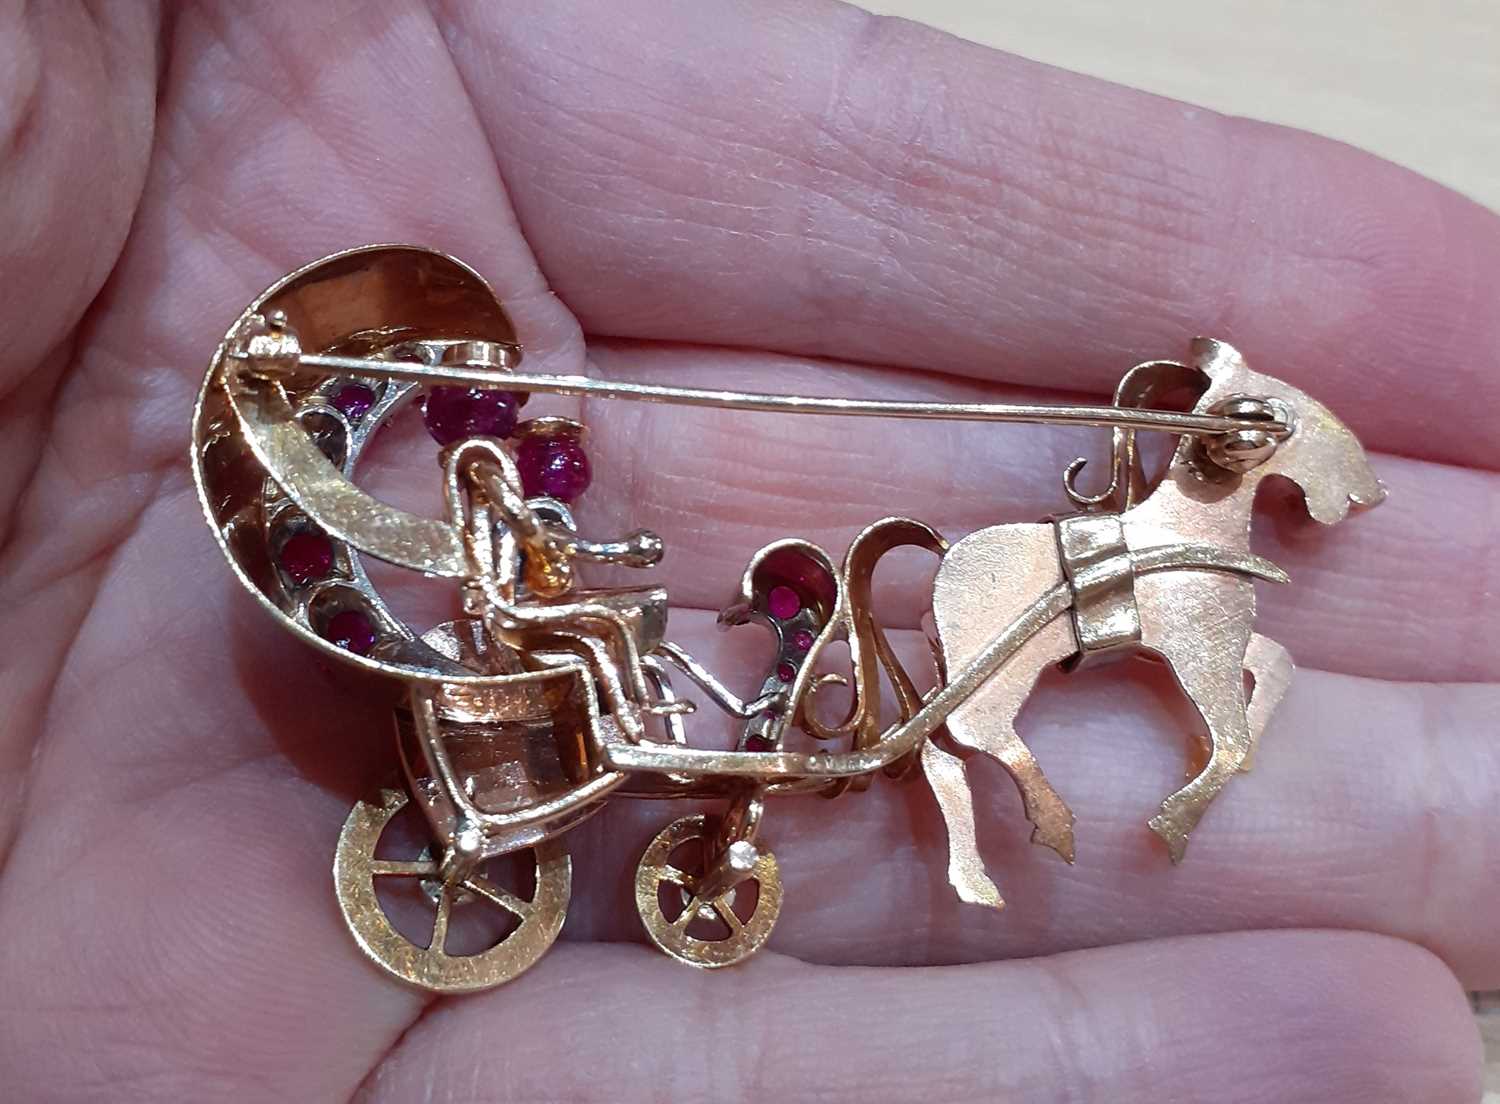 A Synthetic Ruby Novelty Brooch realistically modelled as a yellow horse and carriage driven by - Image 4 of 4